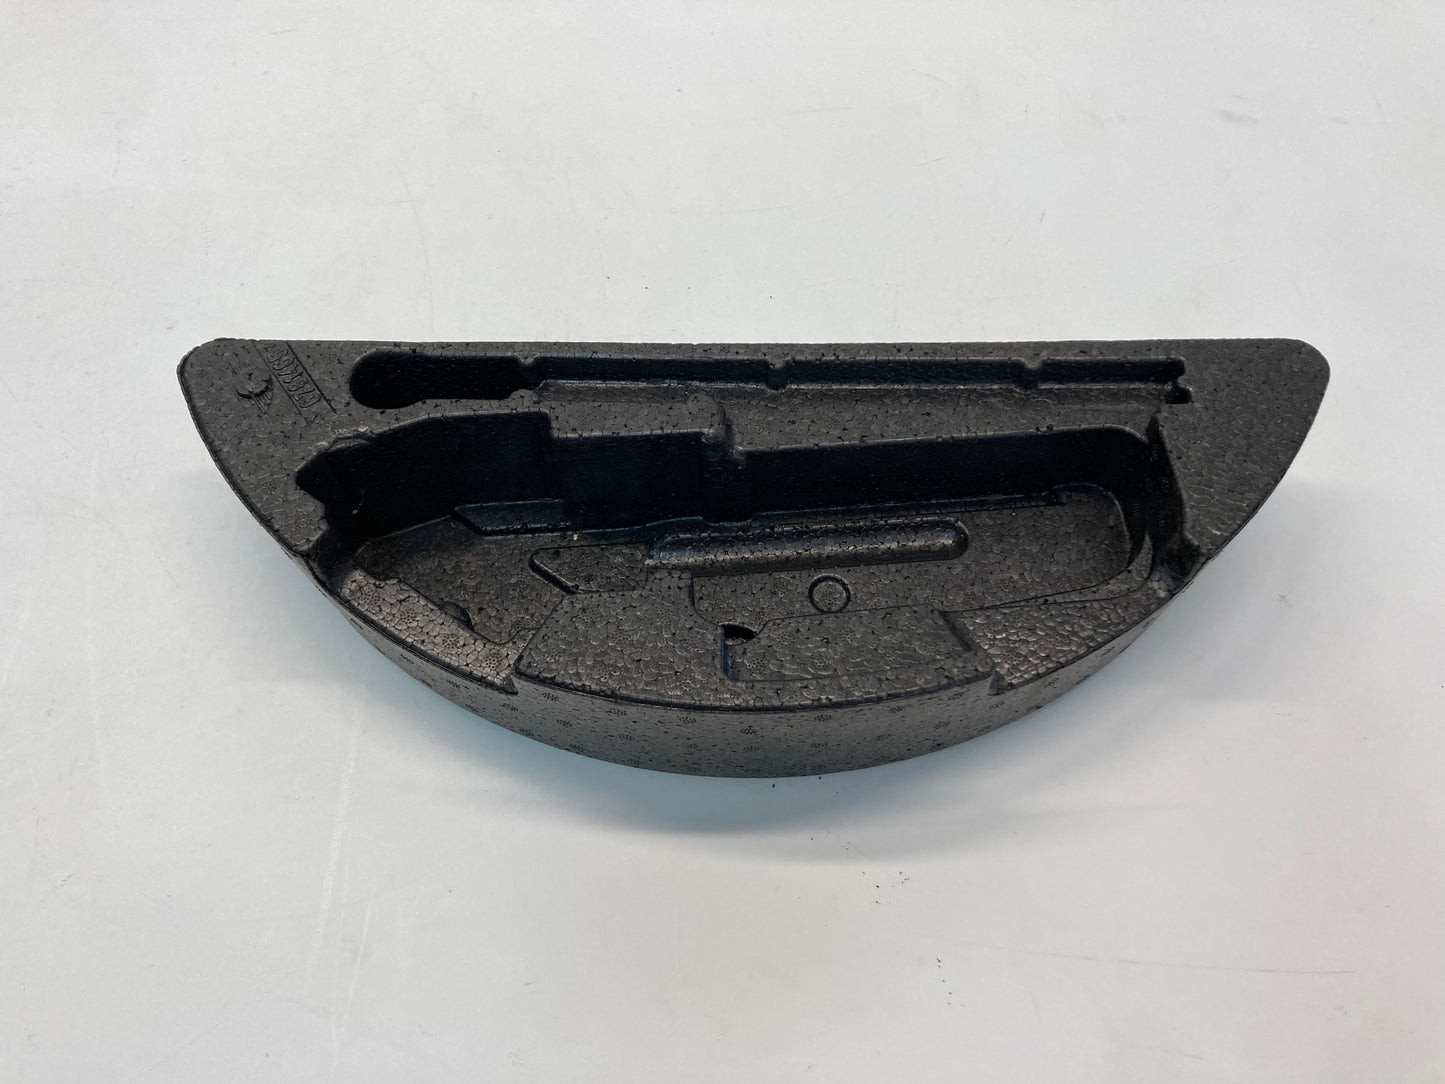 Mini Cooper Clubman Tray for Vehicle Jack 71106781465 08-14 R55